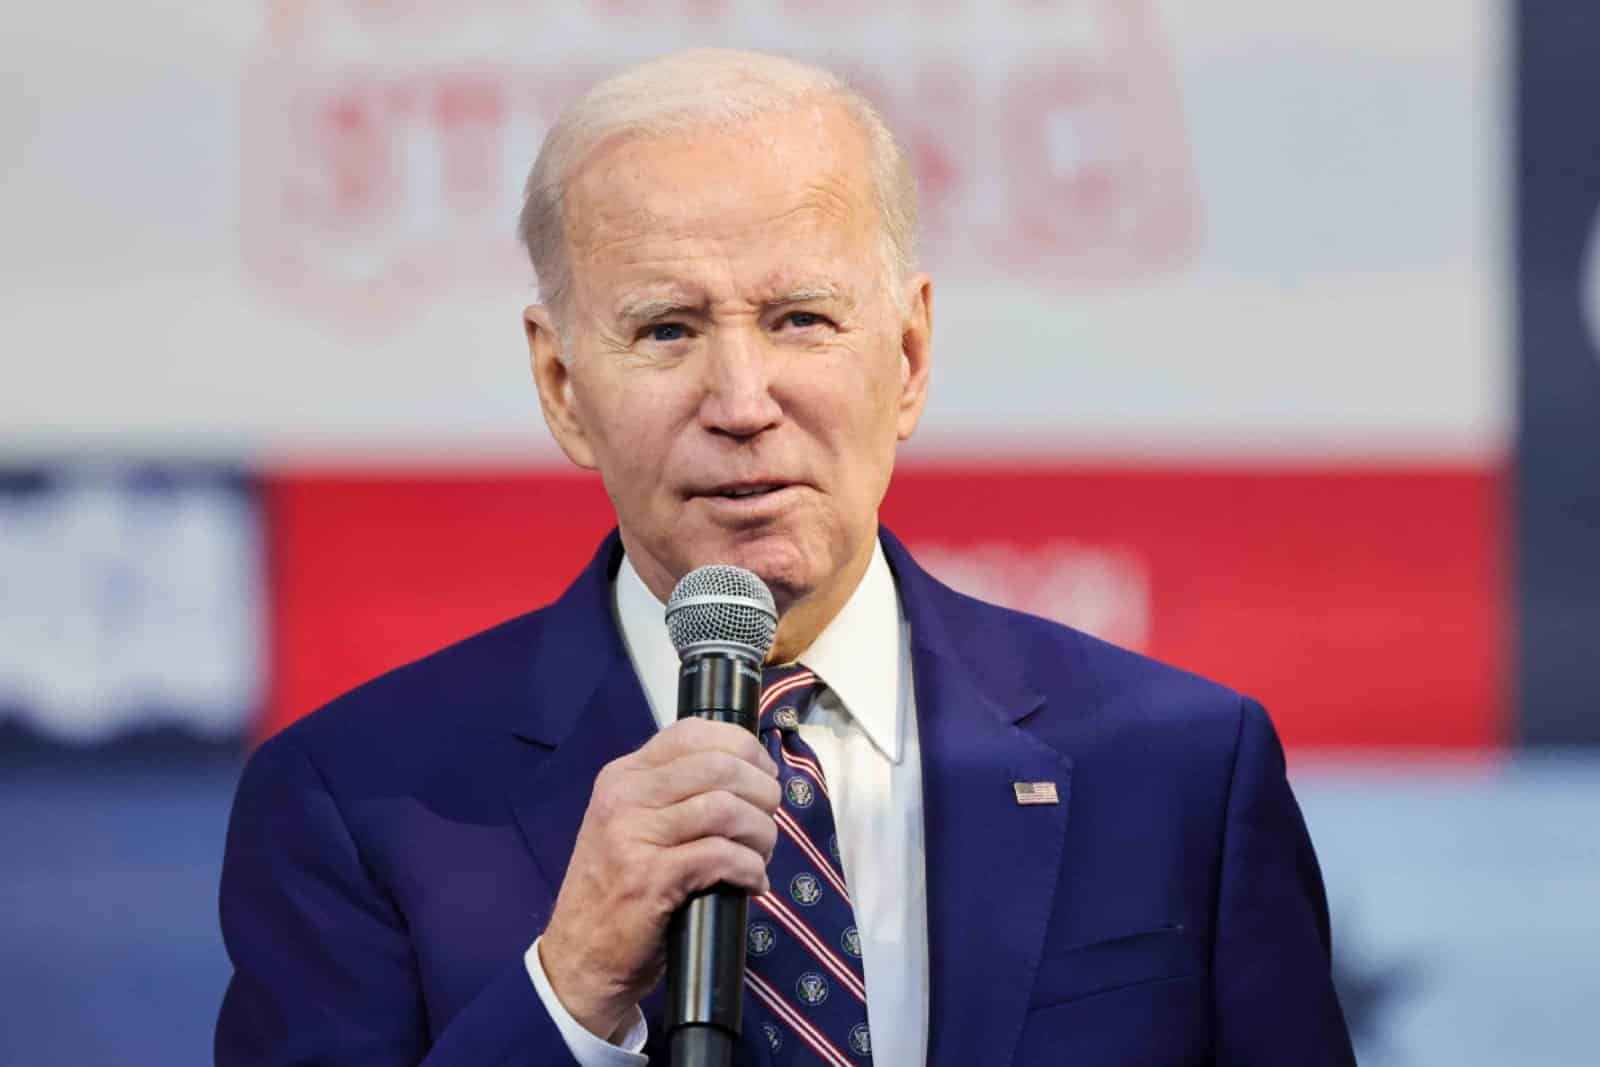 <p>President Biden has a bold plan to revive U.S. chip manufacturing, aiming to rely less on foreign suppliers and enhance national security by domestically producing advanced microchips.</p>